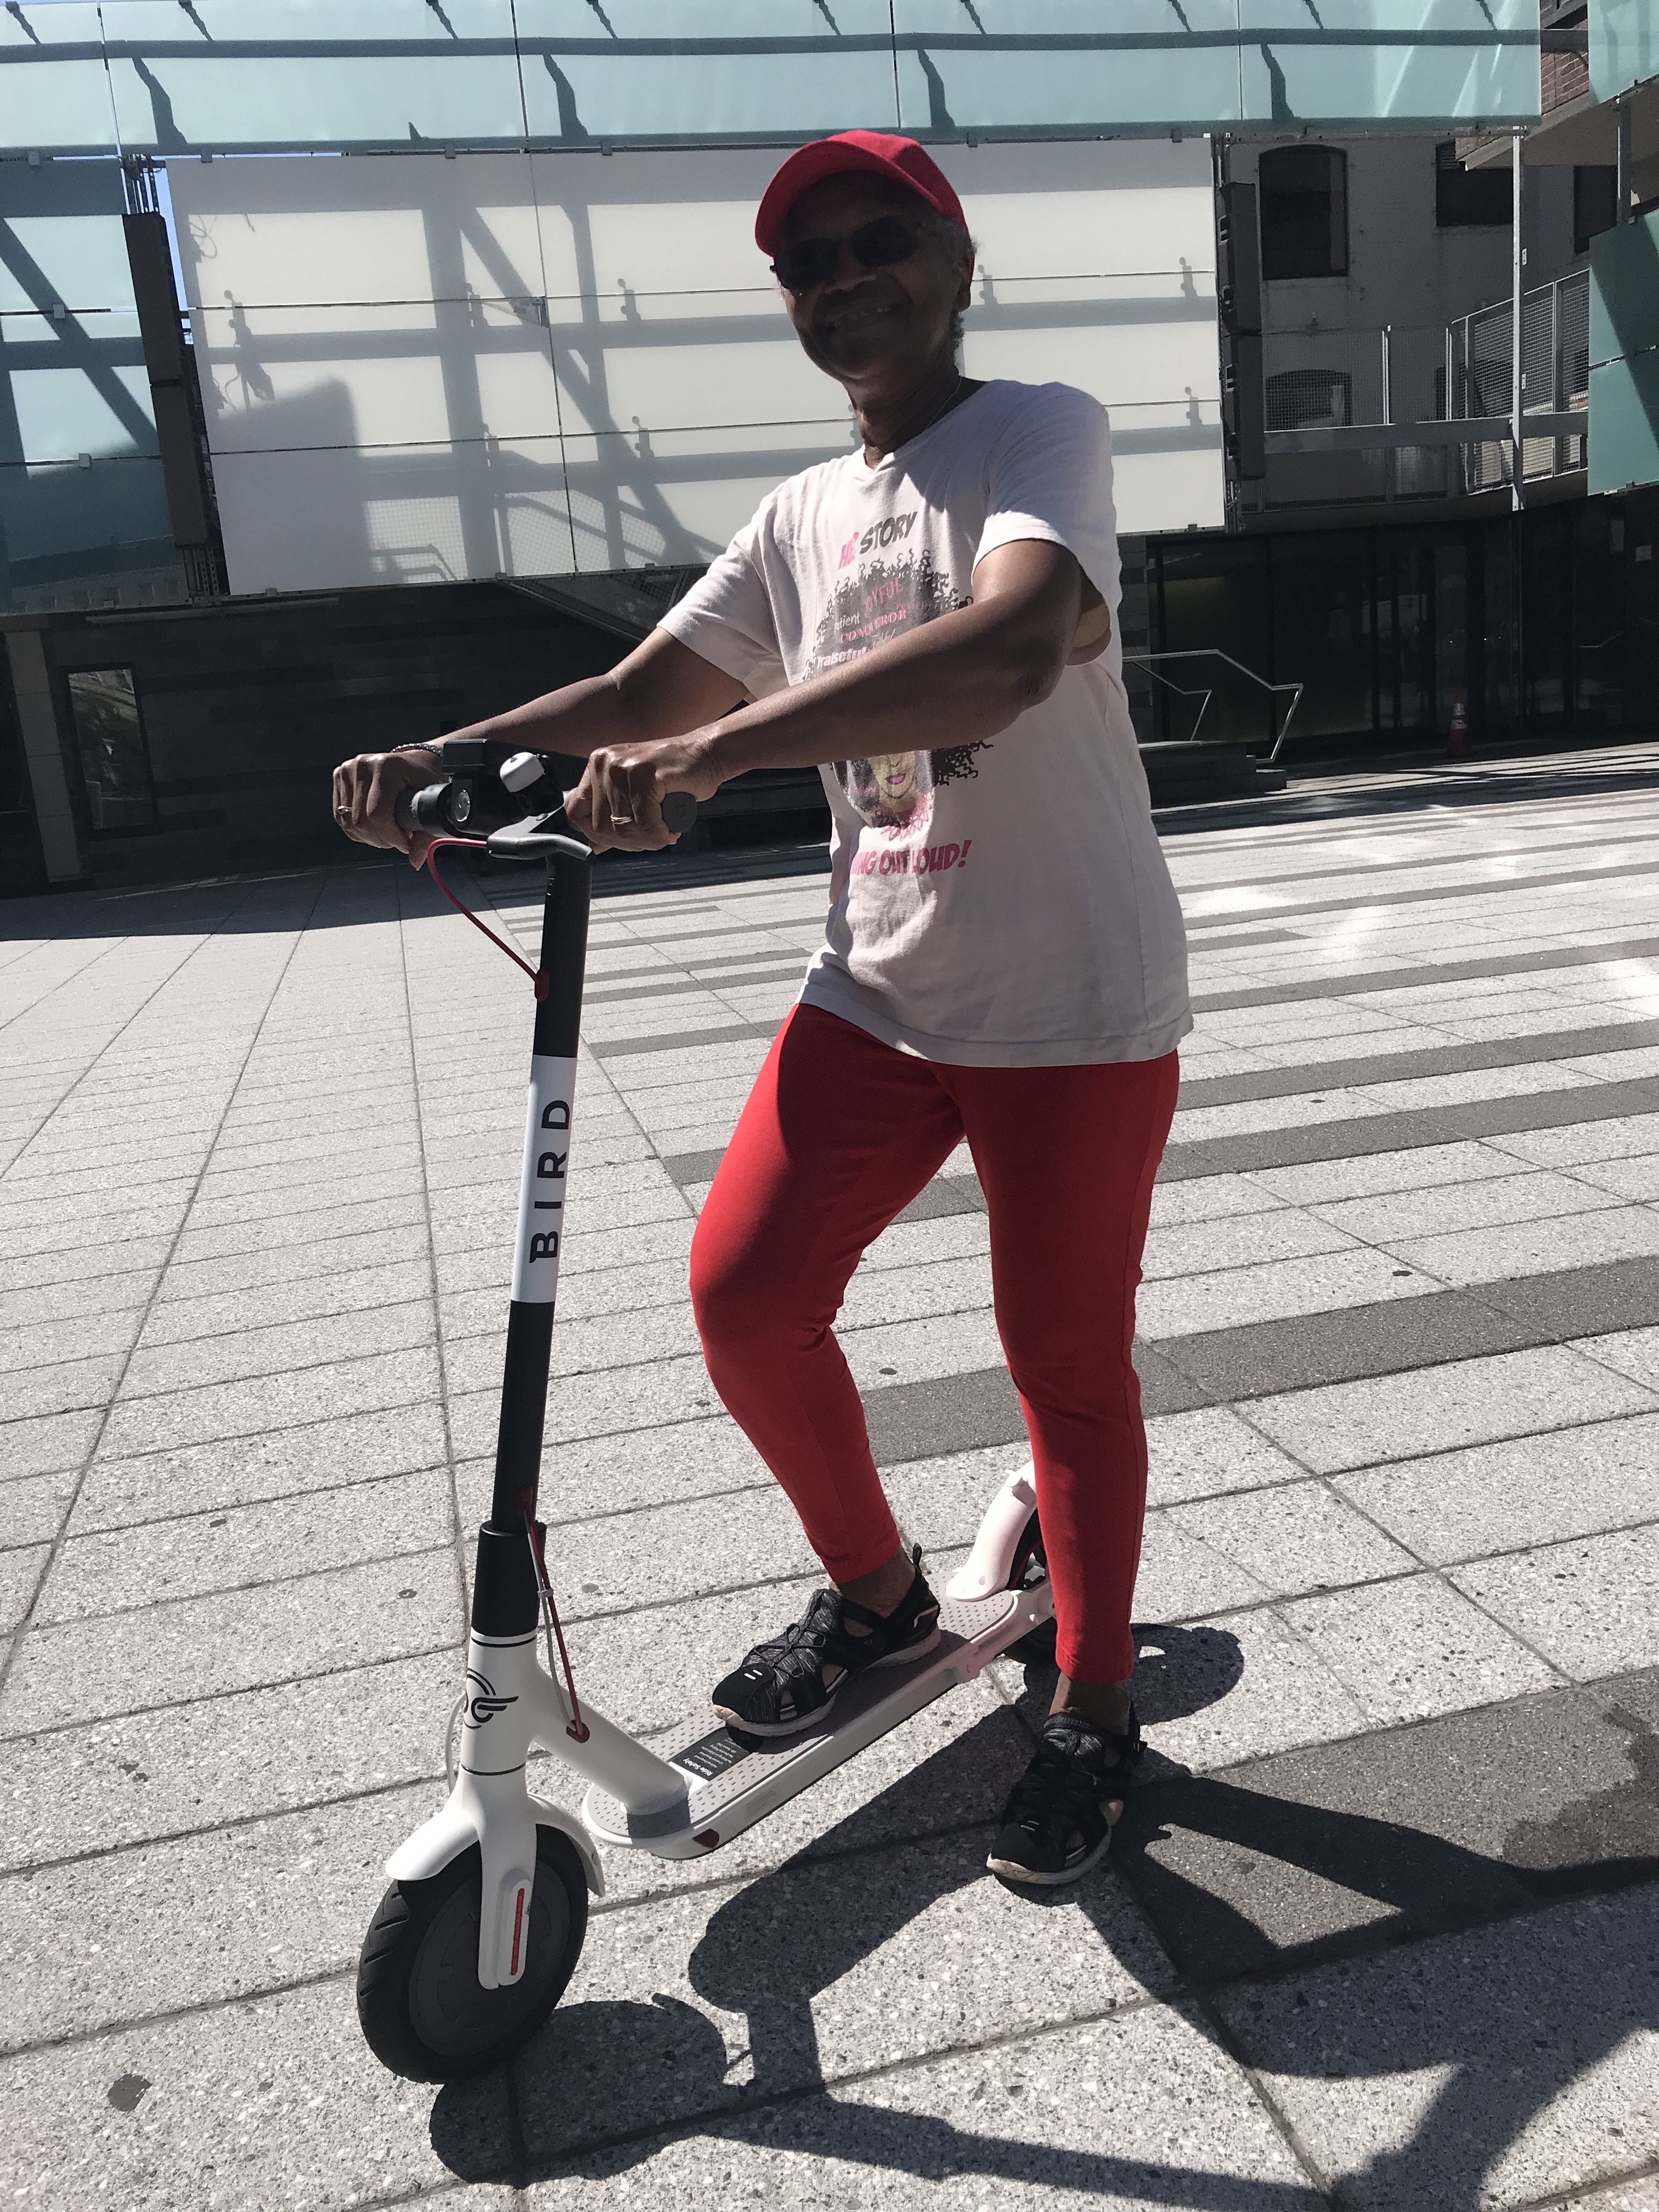 Beatrice Jackson said she liked the scooter — if she can ride on a safe street. Photo: Gersh Kuntzman